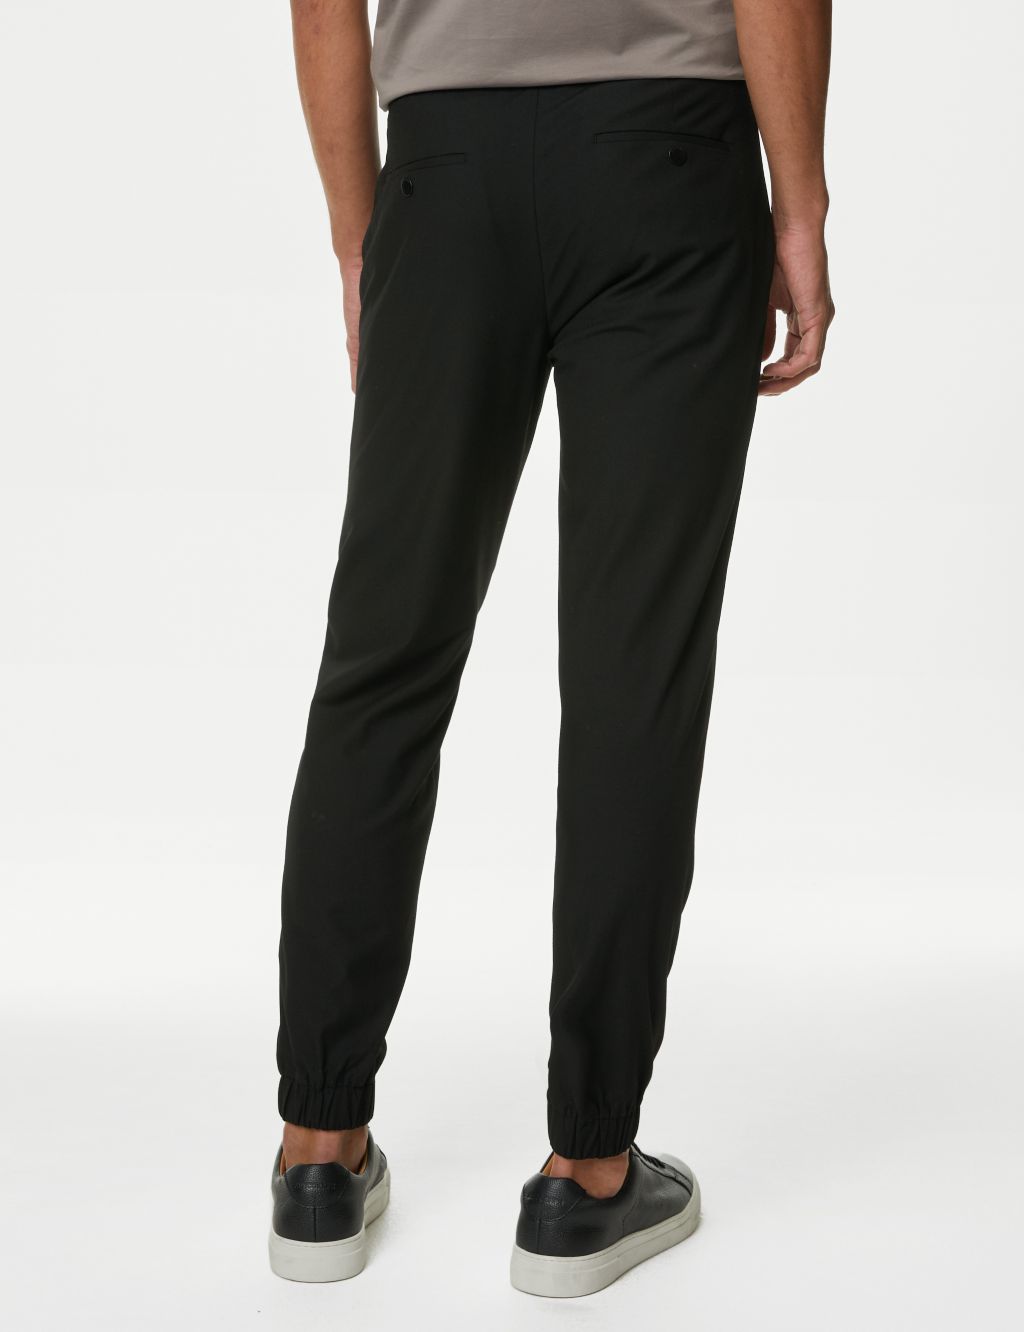 Tailored Fit Flat Front Textured Trousers image 5